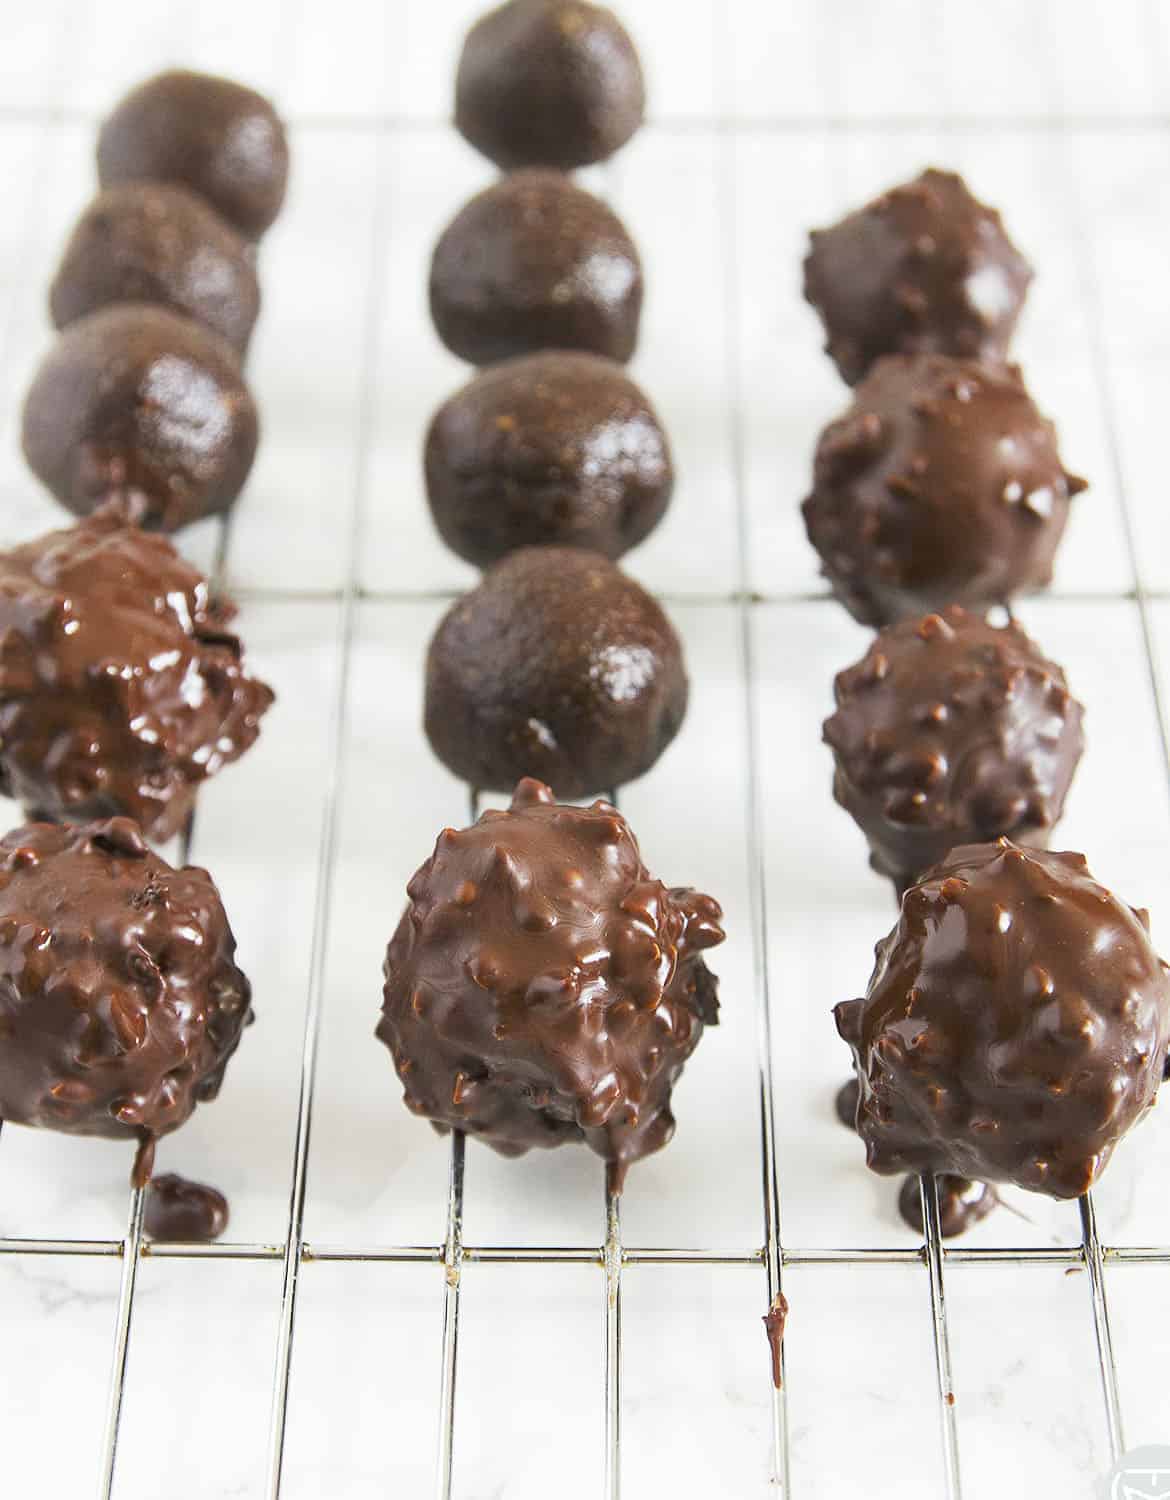 Coat the homemade Ferrero Rocher truffles in melted chocolate and chopped hazelnuts for a delicious finishing touch.